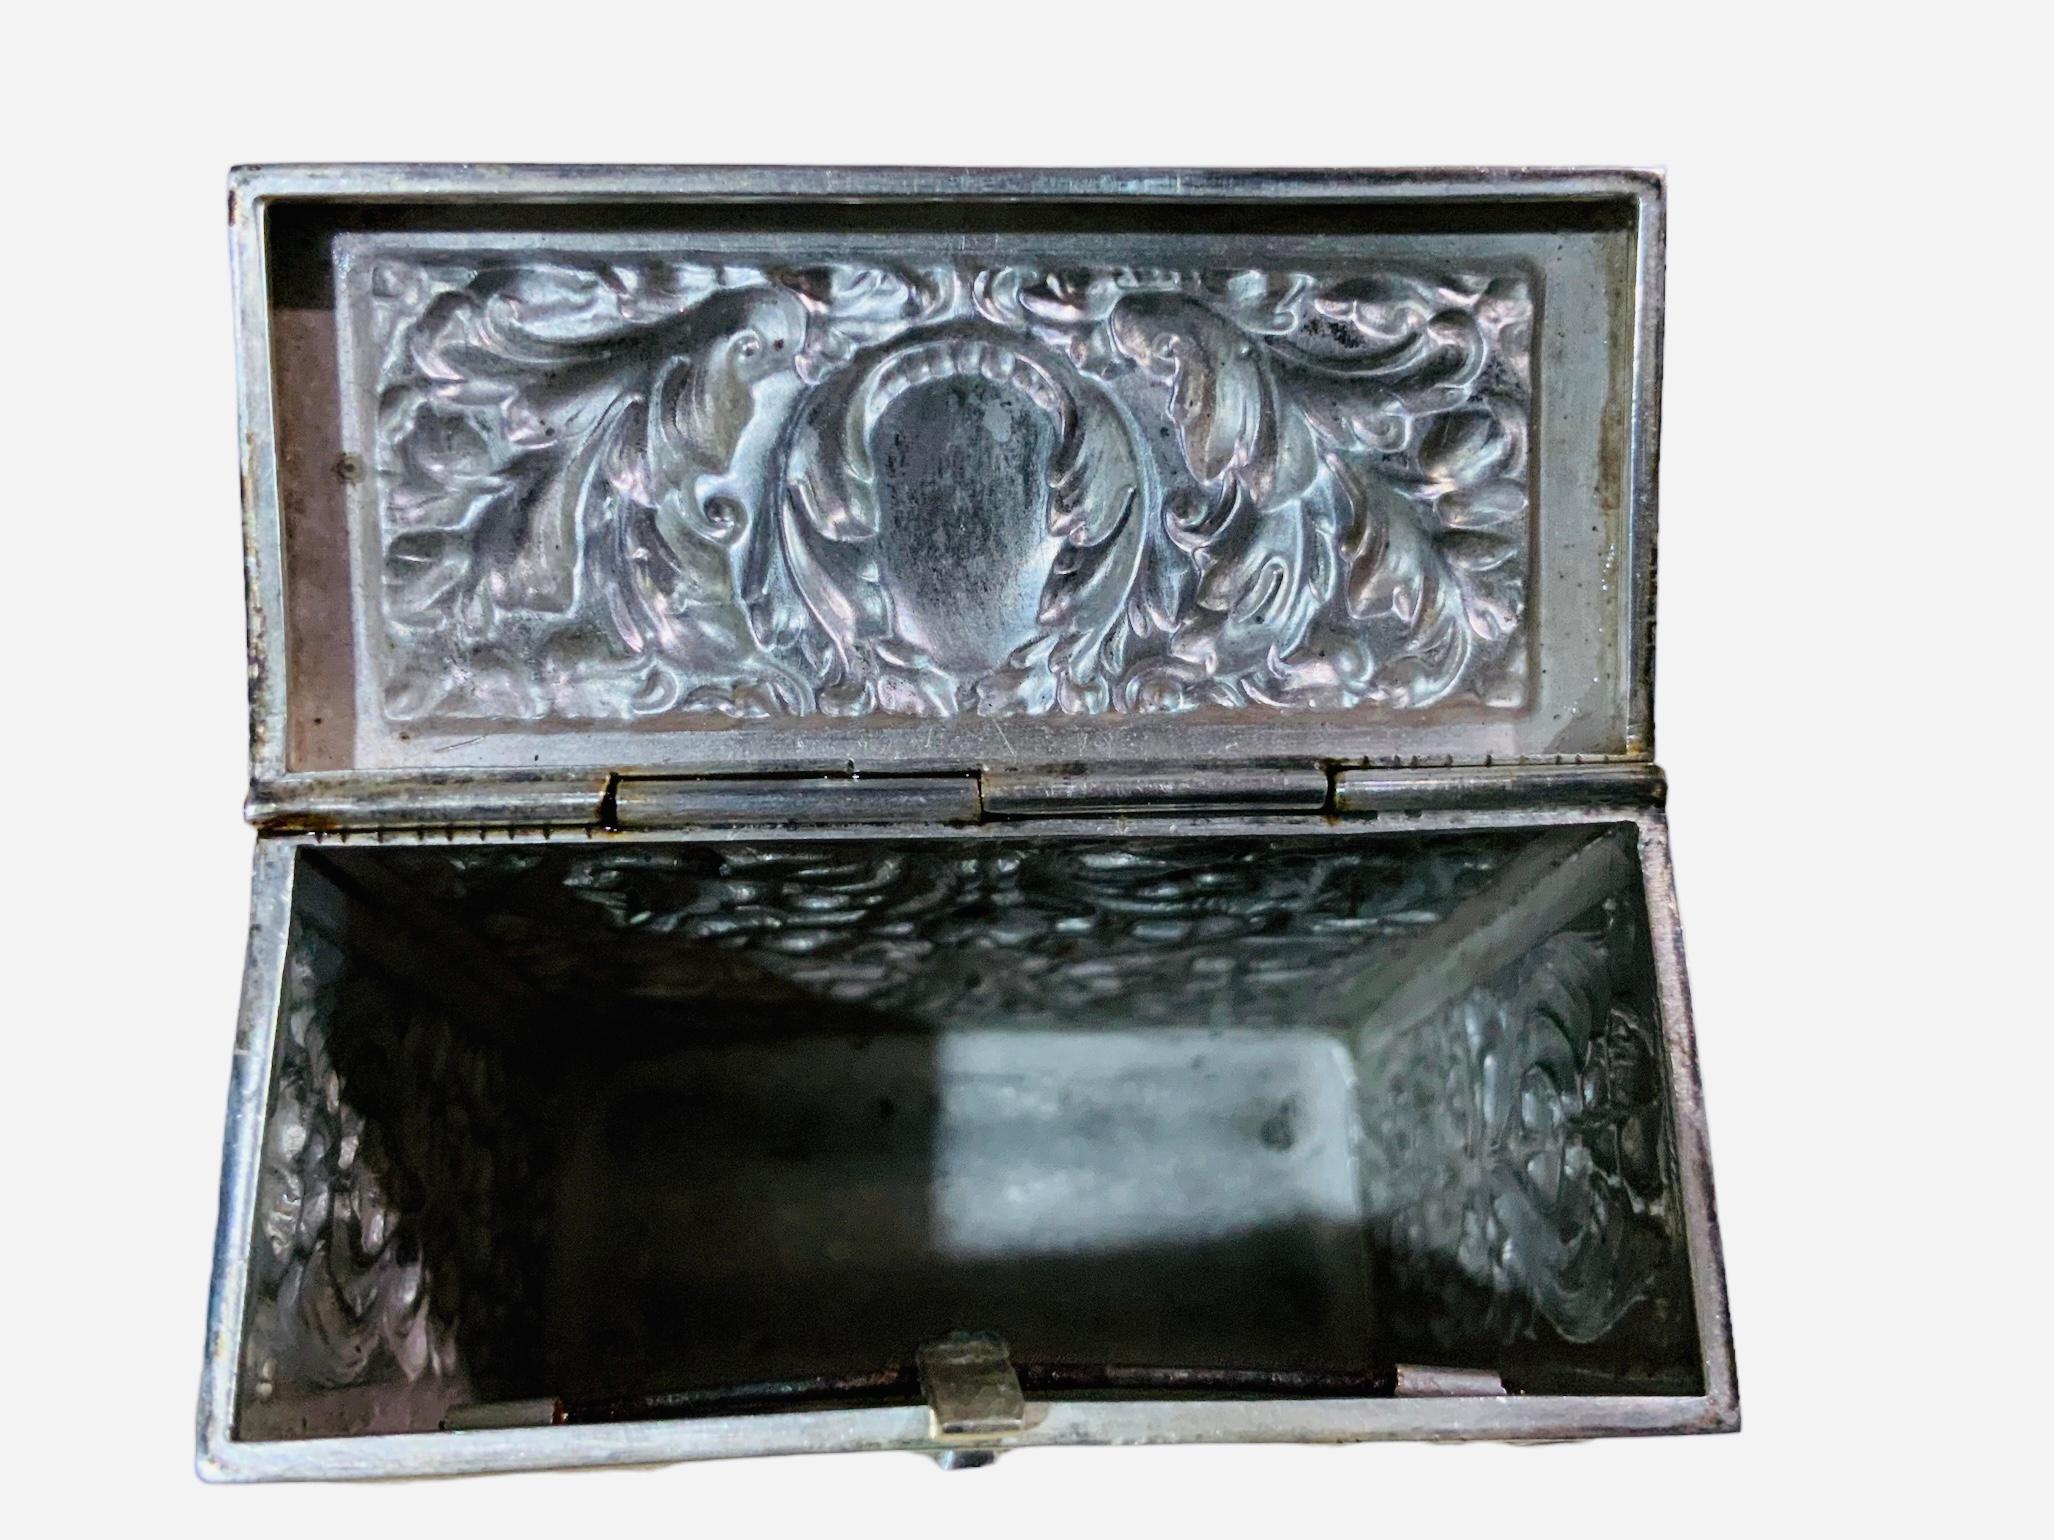 This is a Spaniard Silver Box. It depicts a hinged lid rectangular box adorned with a delicate repousse pattern of acanthus leaves and flowers in the front, back and sides of it. A monogram of three letters- ERO- are inscribed in the top of the lid.